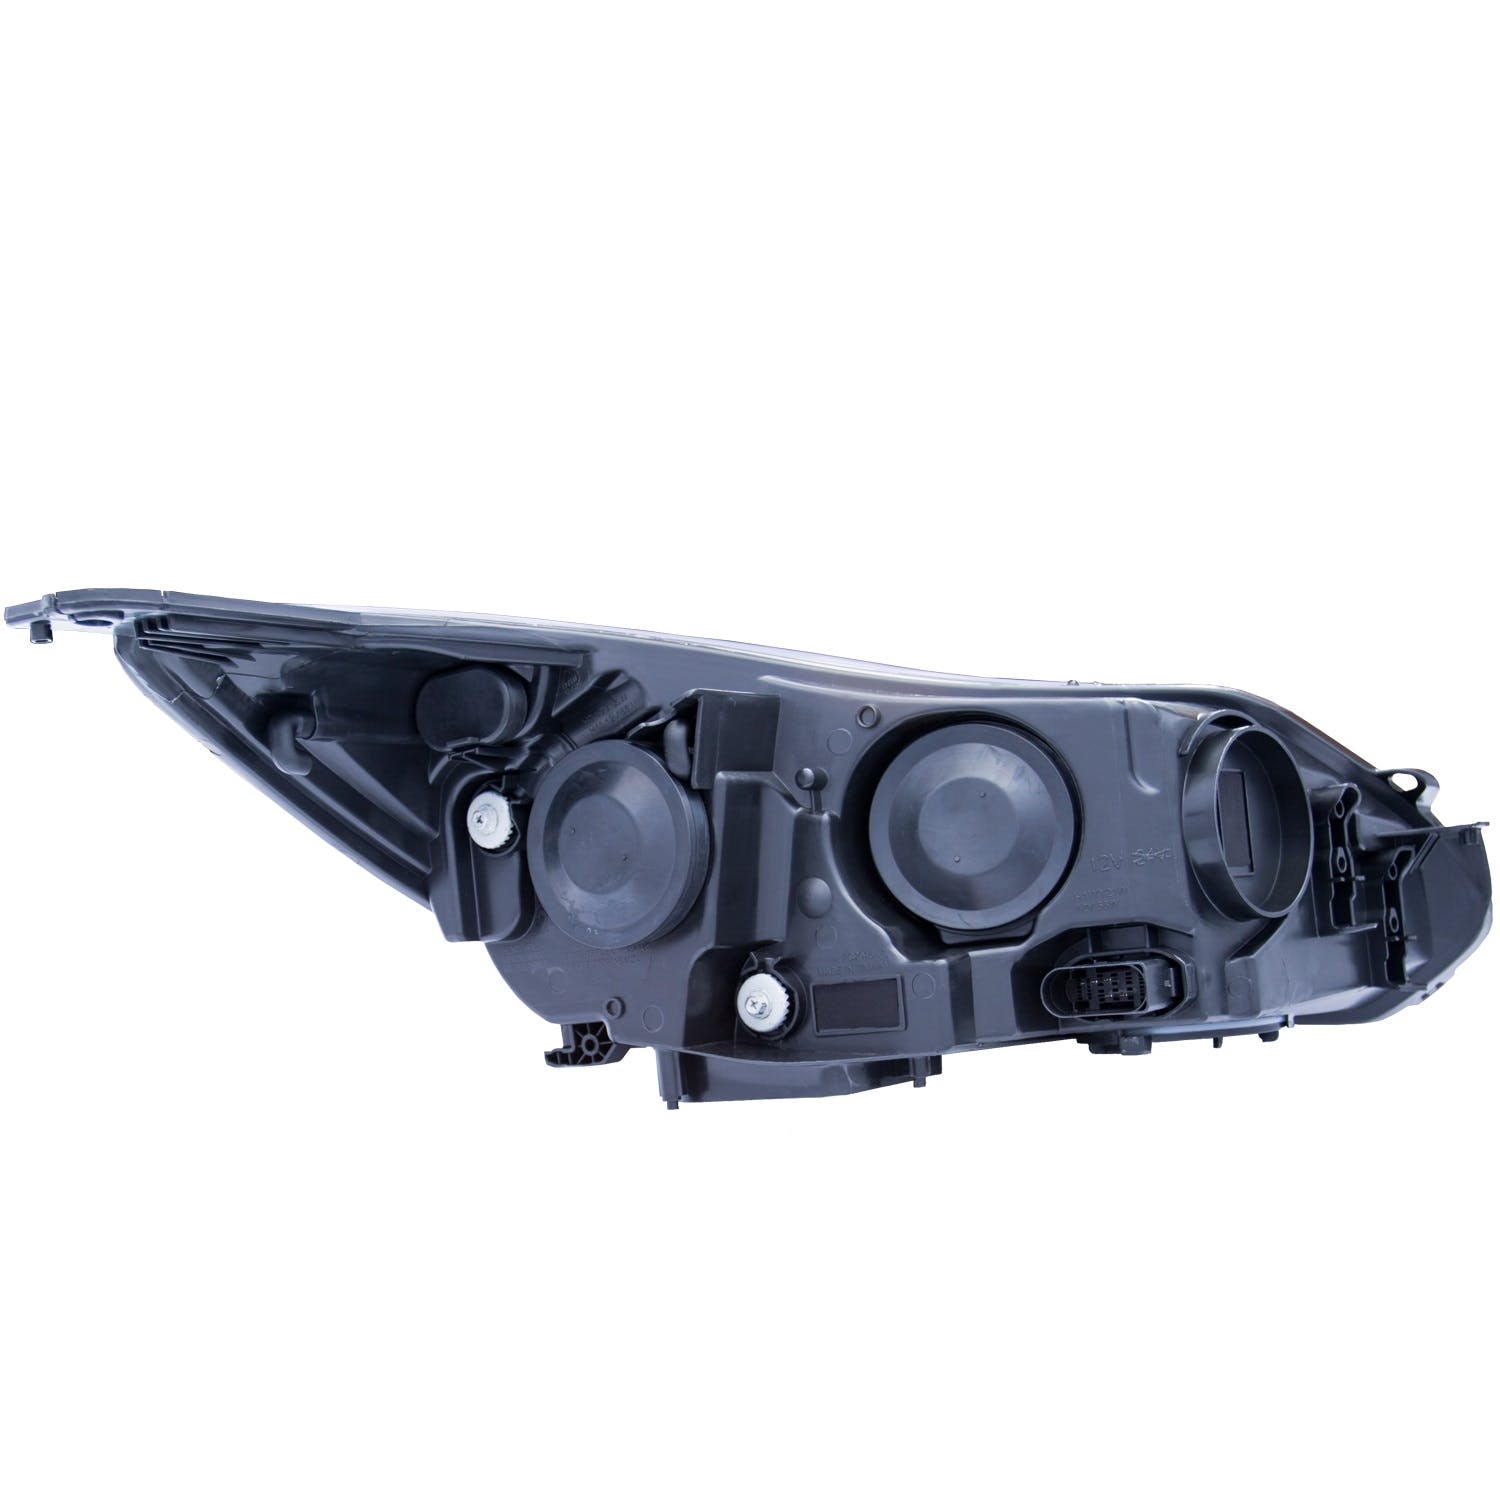 AnzoUSA 121490 Projector Headlights with Plank Style Design Black